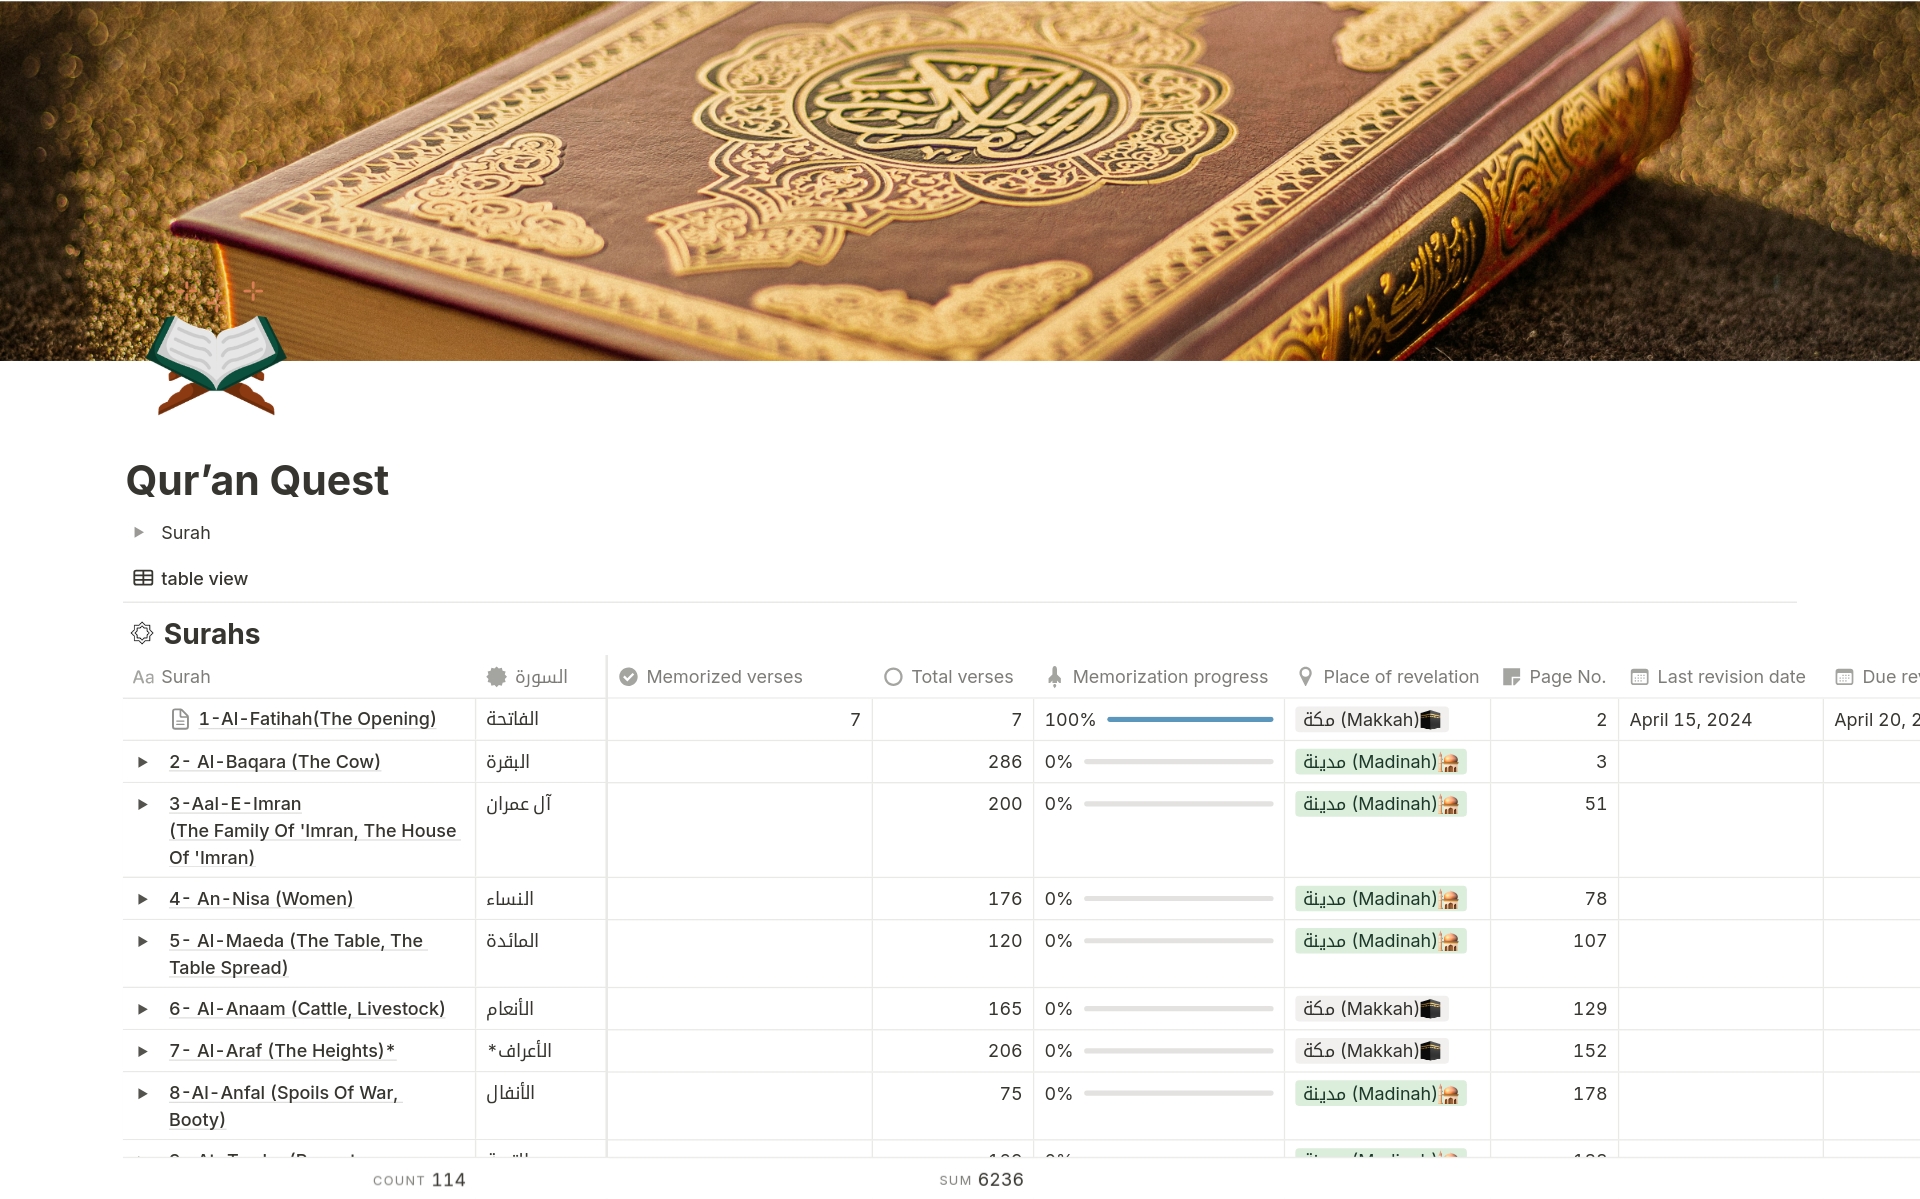 This template offers you a simple but engaging way to track your progress in memorizing the Quran, including your revisions, and deepen your relationship with the Holy Book.

